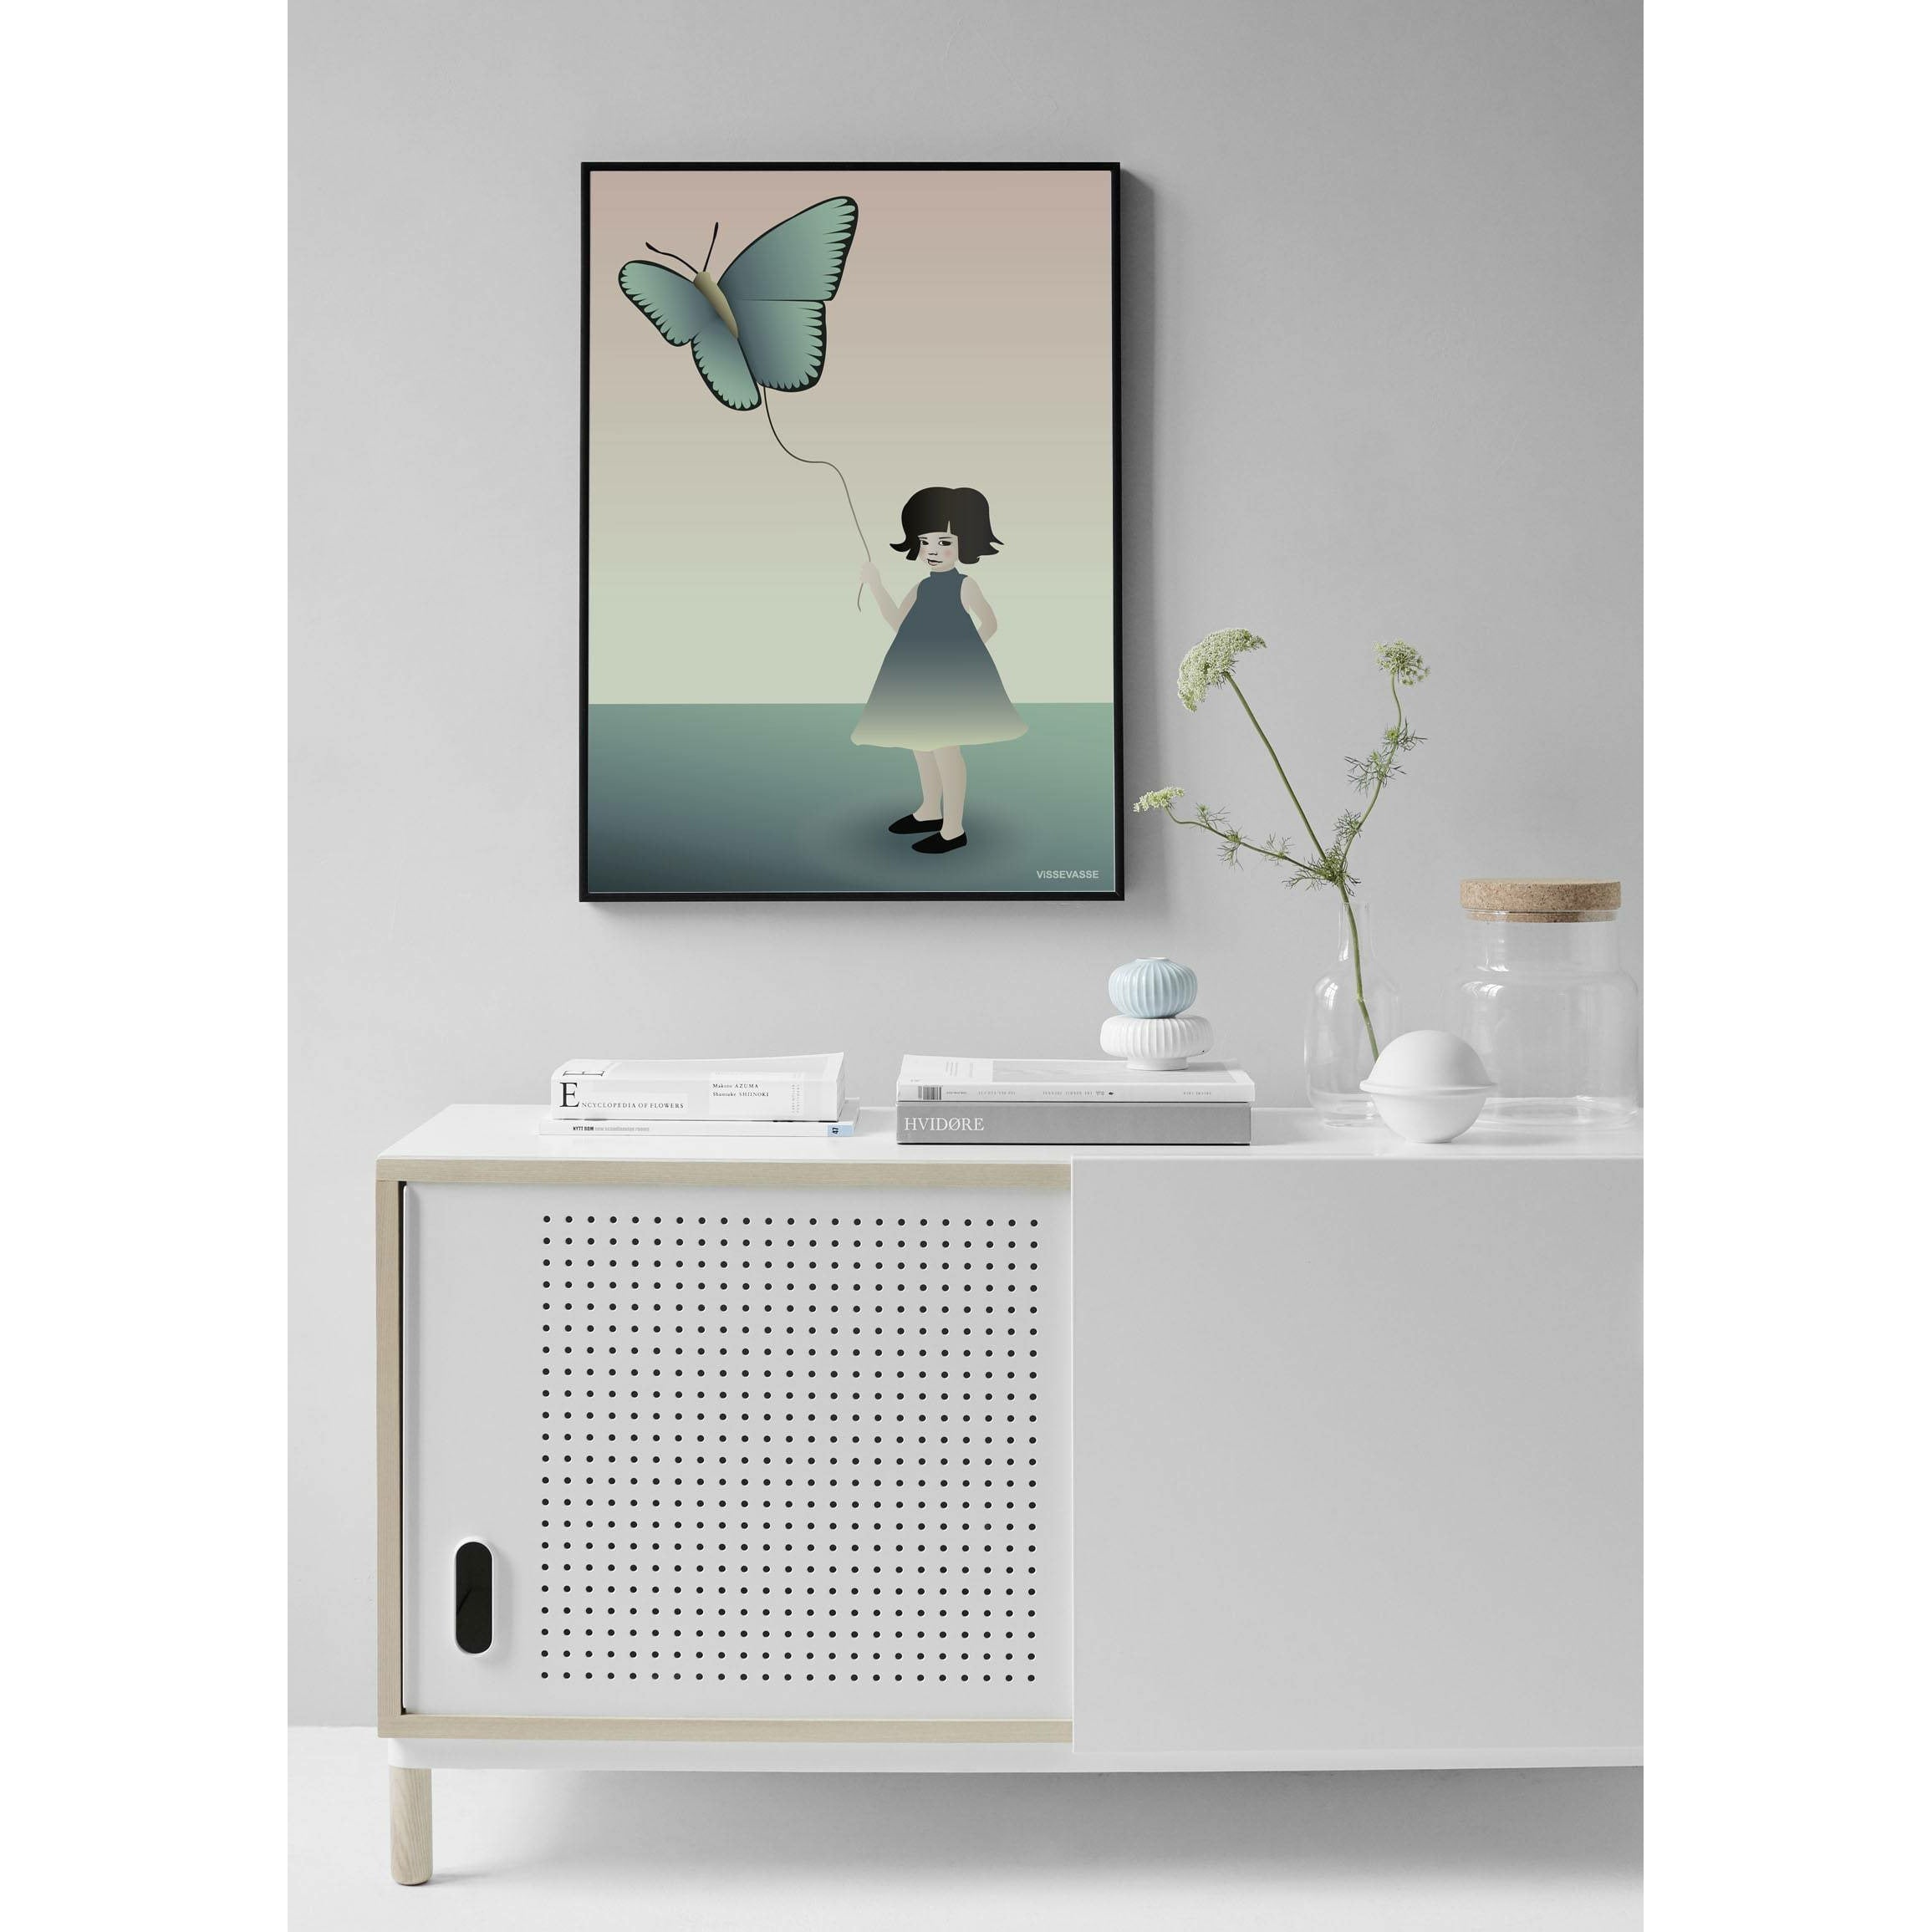 Vissevasse Girl With The Butterfly Poster, 70 X100 Cm